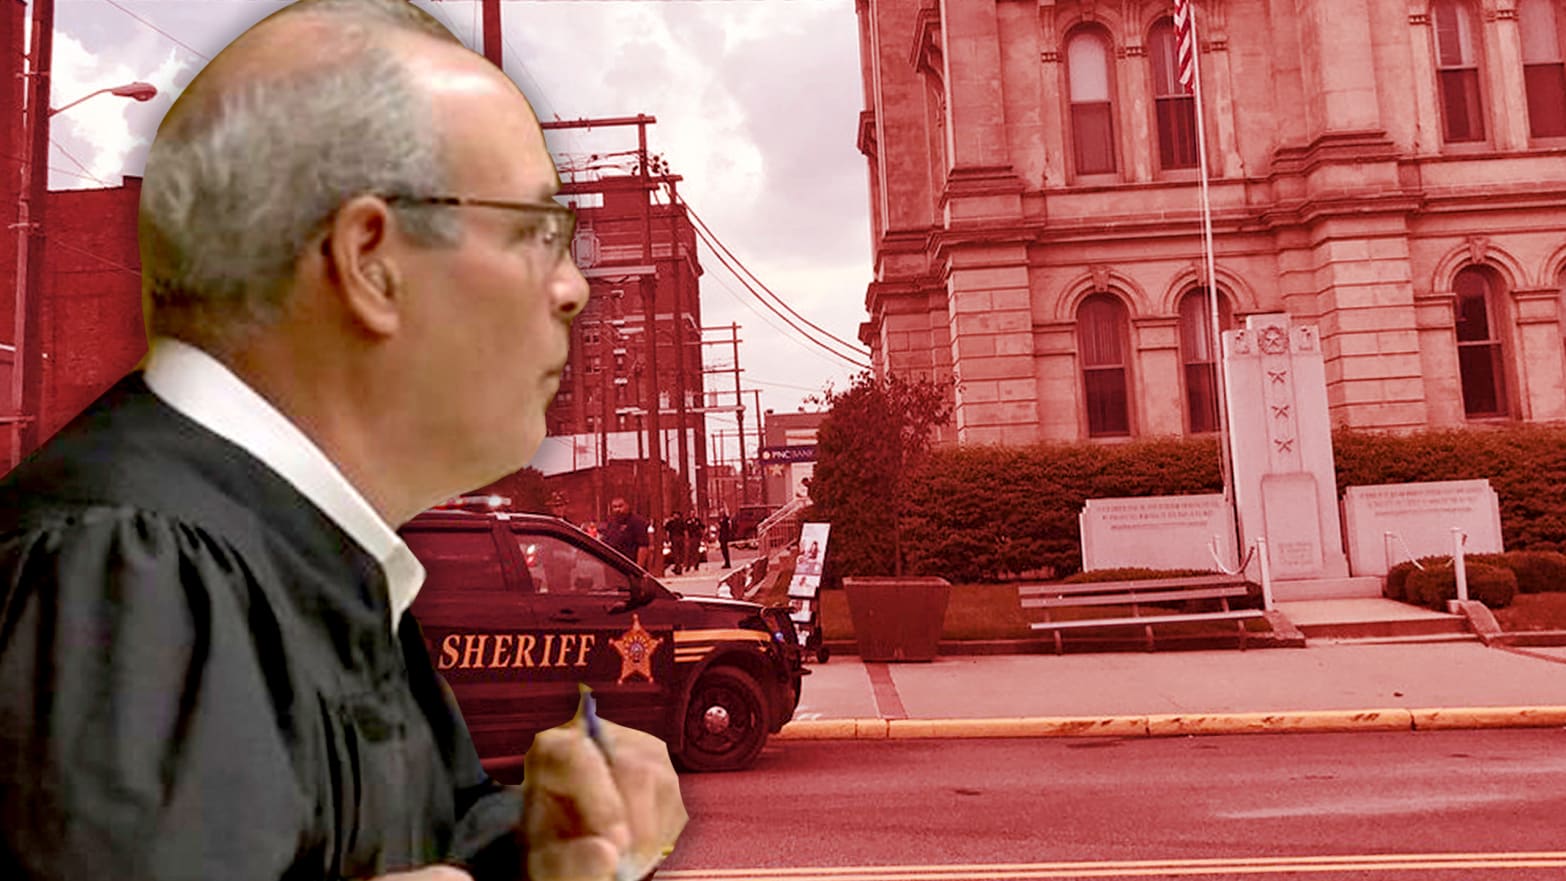 Judge Joseph Bruzzese survived an attack by a gunman in Steubenville, Ohio, after he returned fire Monday morning. The sheriff said he told Bruzzese to pack heat.